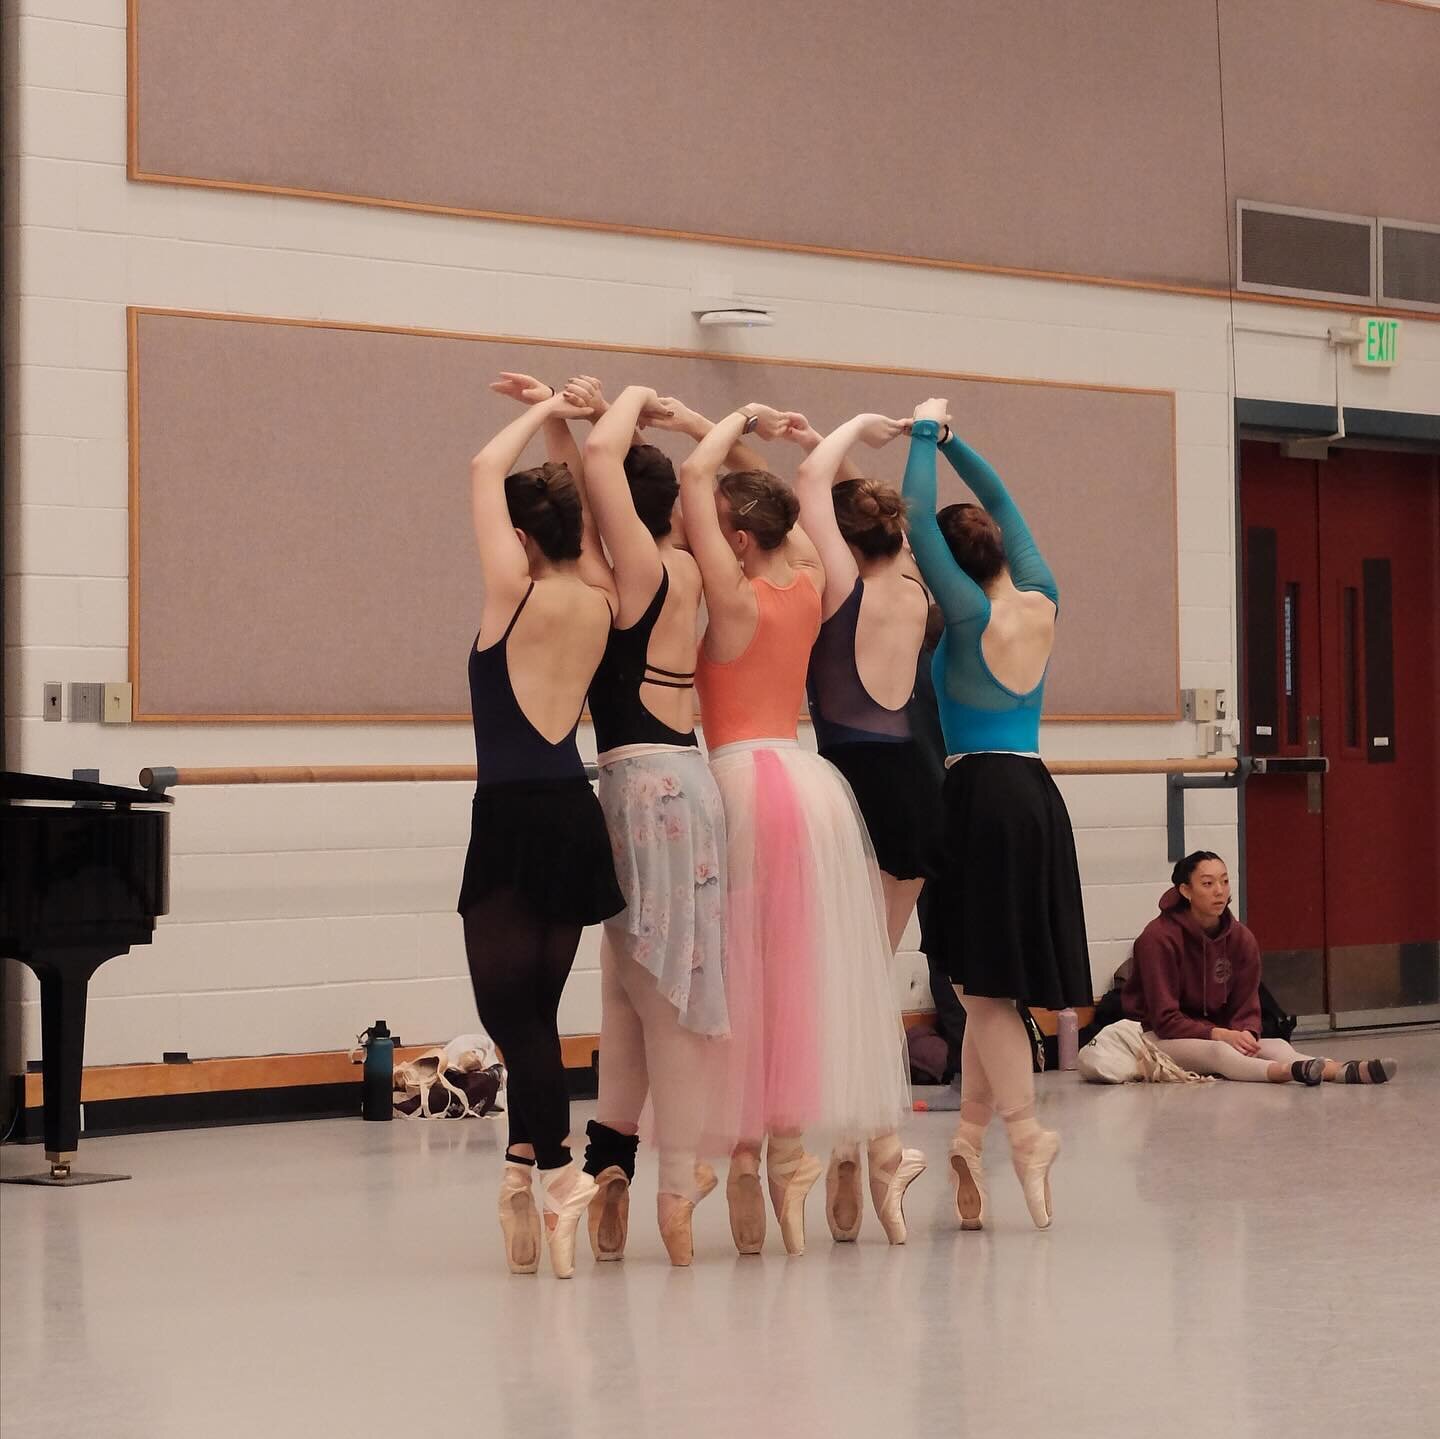 A glimpse of &ldquo;Serenade&rdquo; rehearsals, via @haleyfreee at @thechrony. Read Haley Freeman&rsquo;s previous reporting on the Ballet at the link in our bio. 

You can seen this iconic piece of choreography at our Utah Ballet &amp; Contemporary 